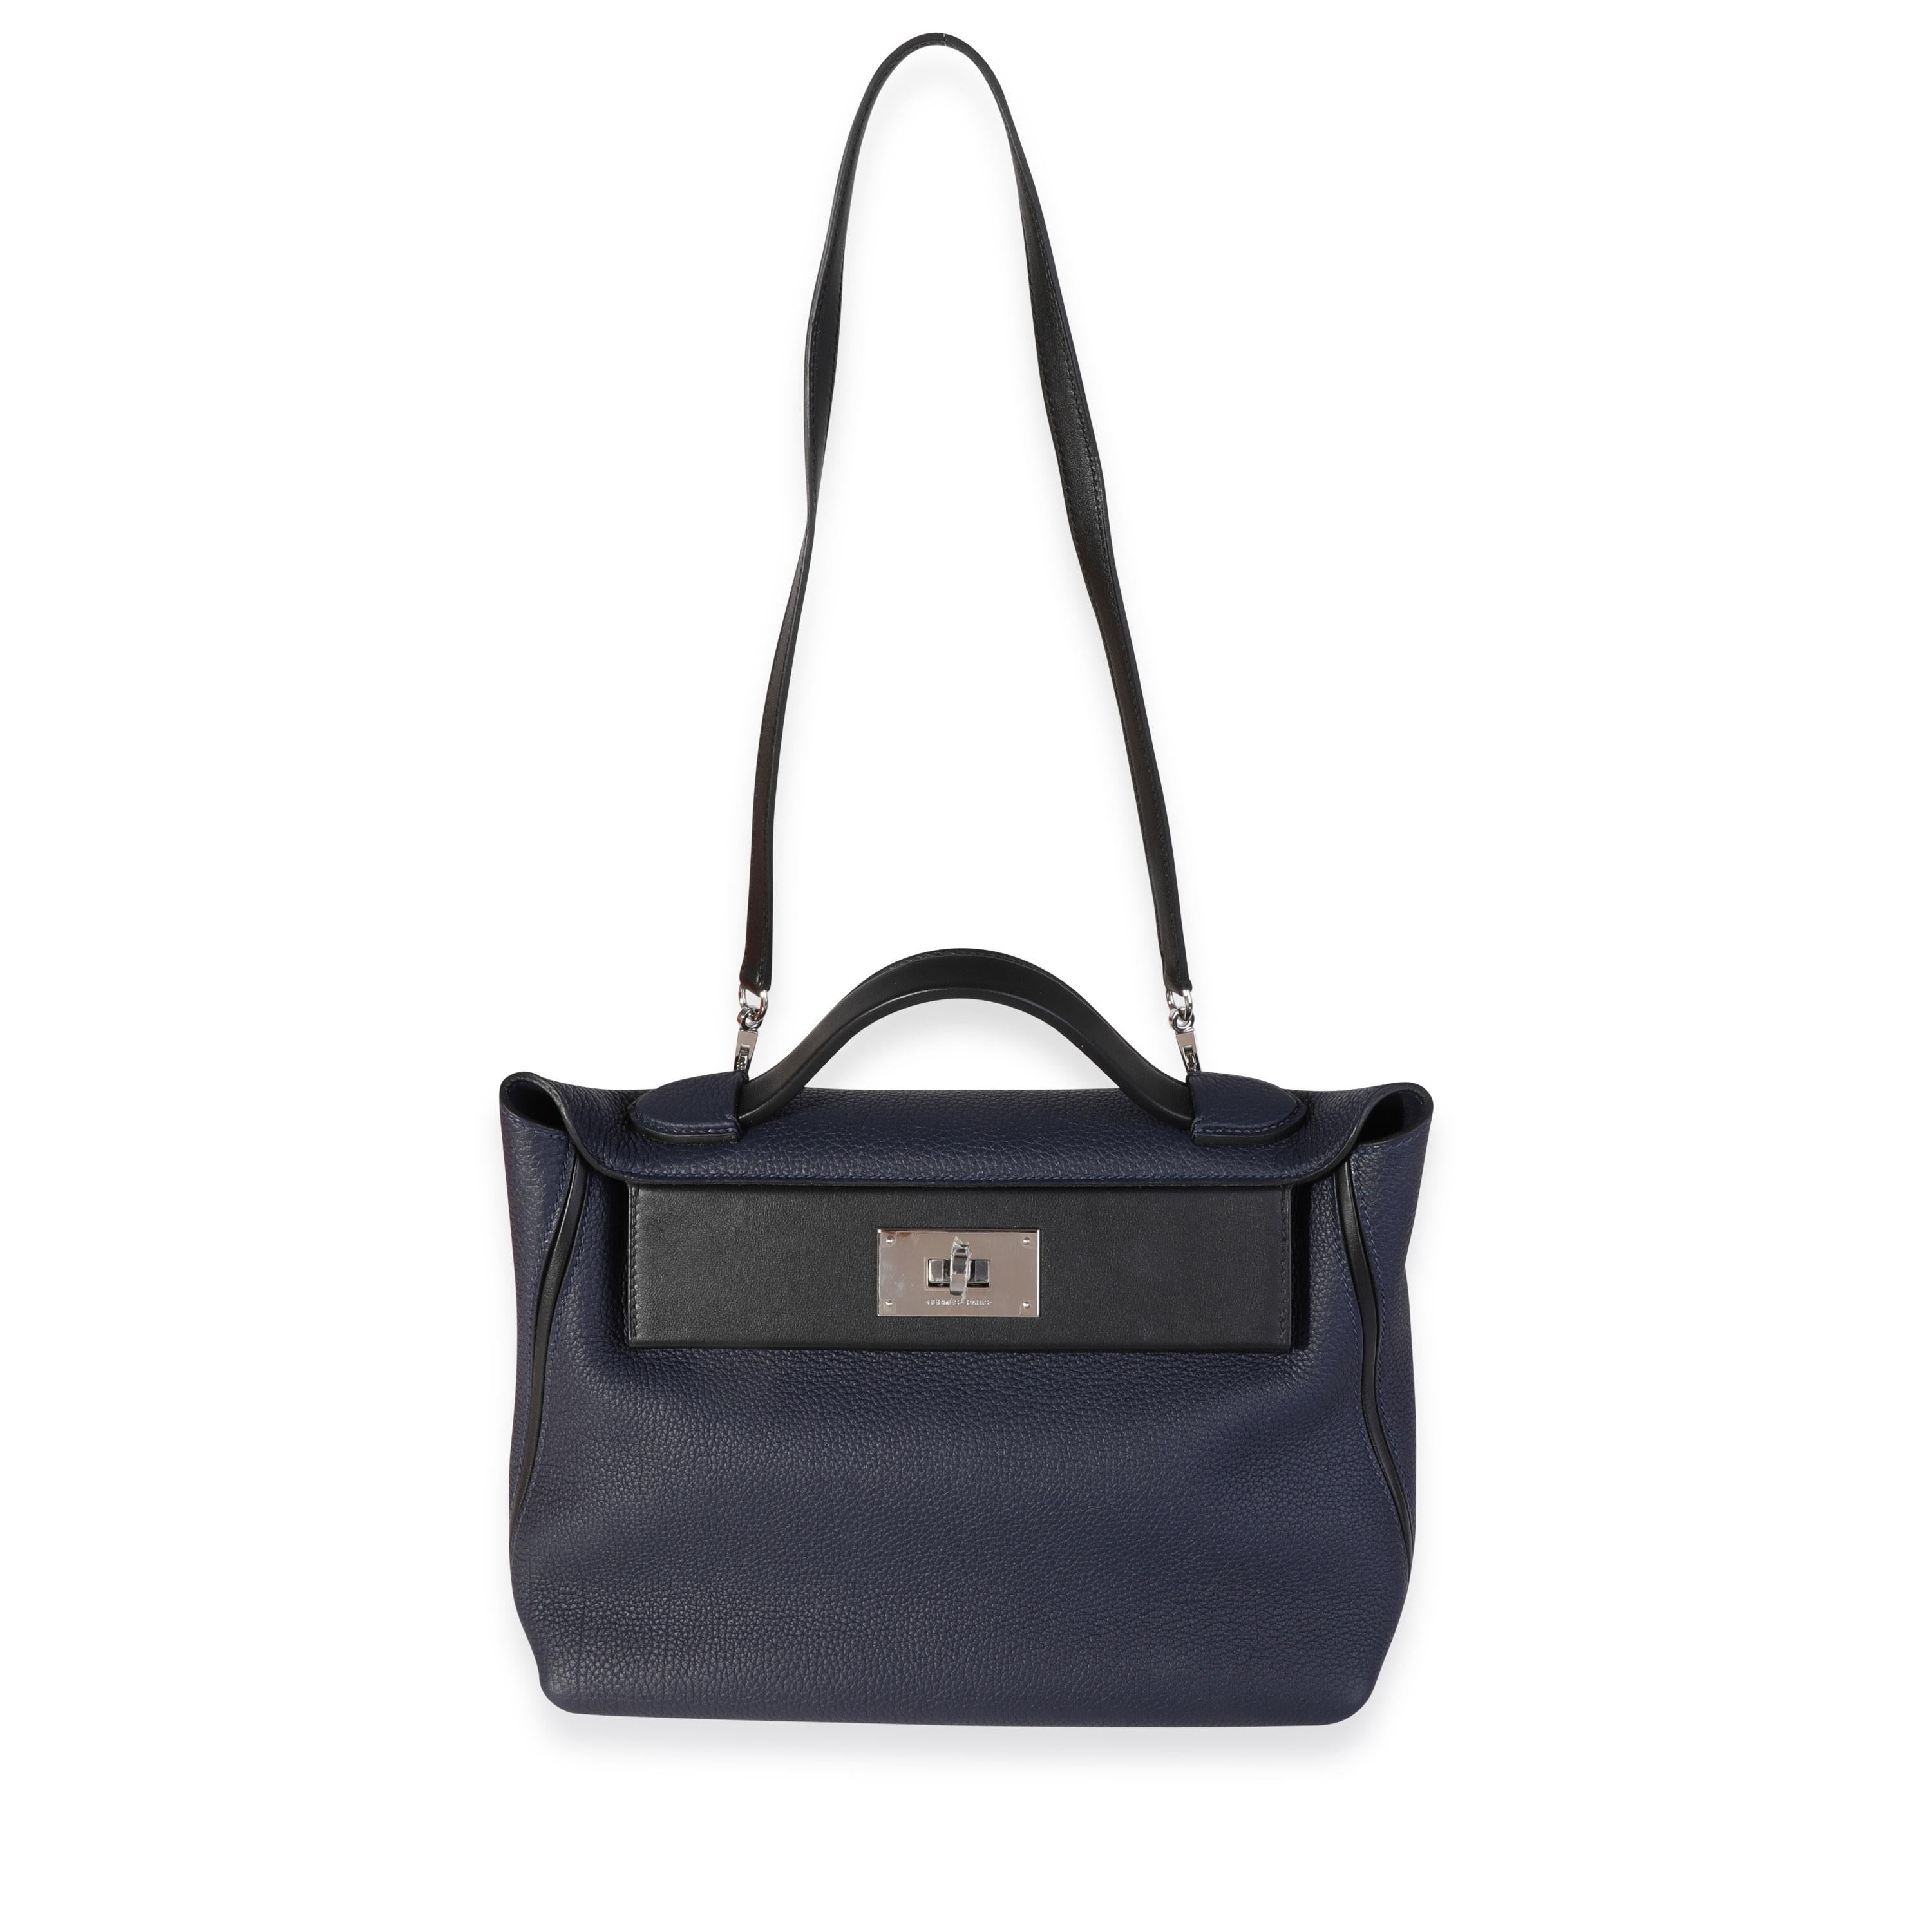 Listing Title: Hermès Bleu Nuit Togo & Black Swift 24/24 21 Bag PHW
SKU: 120214
Condition: Pre-owned 
Handbag Condition: Very Good
Condition Comments: Very Good Condition. Plastic on hardware. Light scuffing to exterior and interior leather.
Brand: